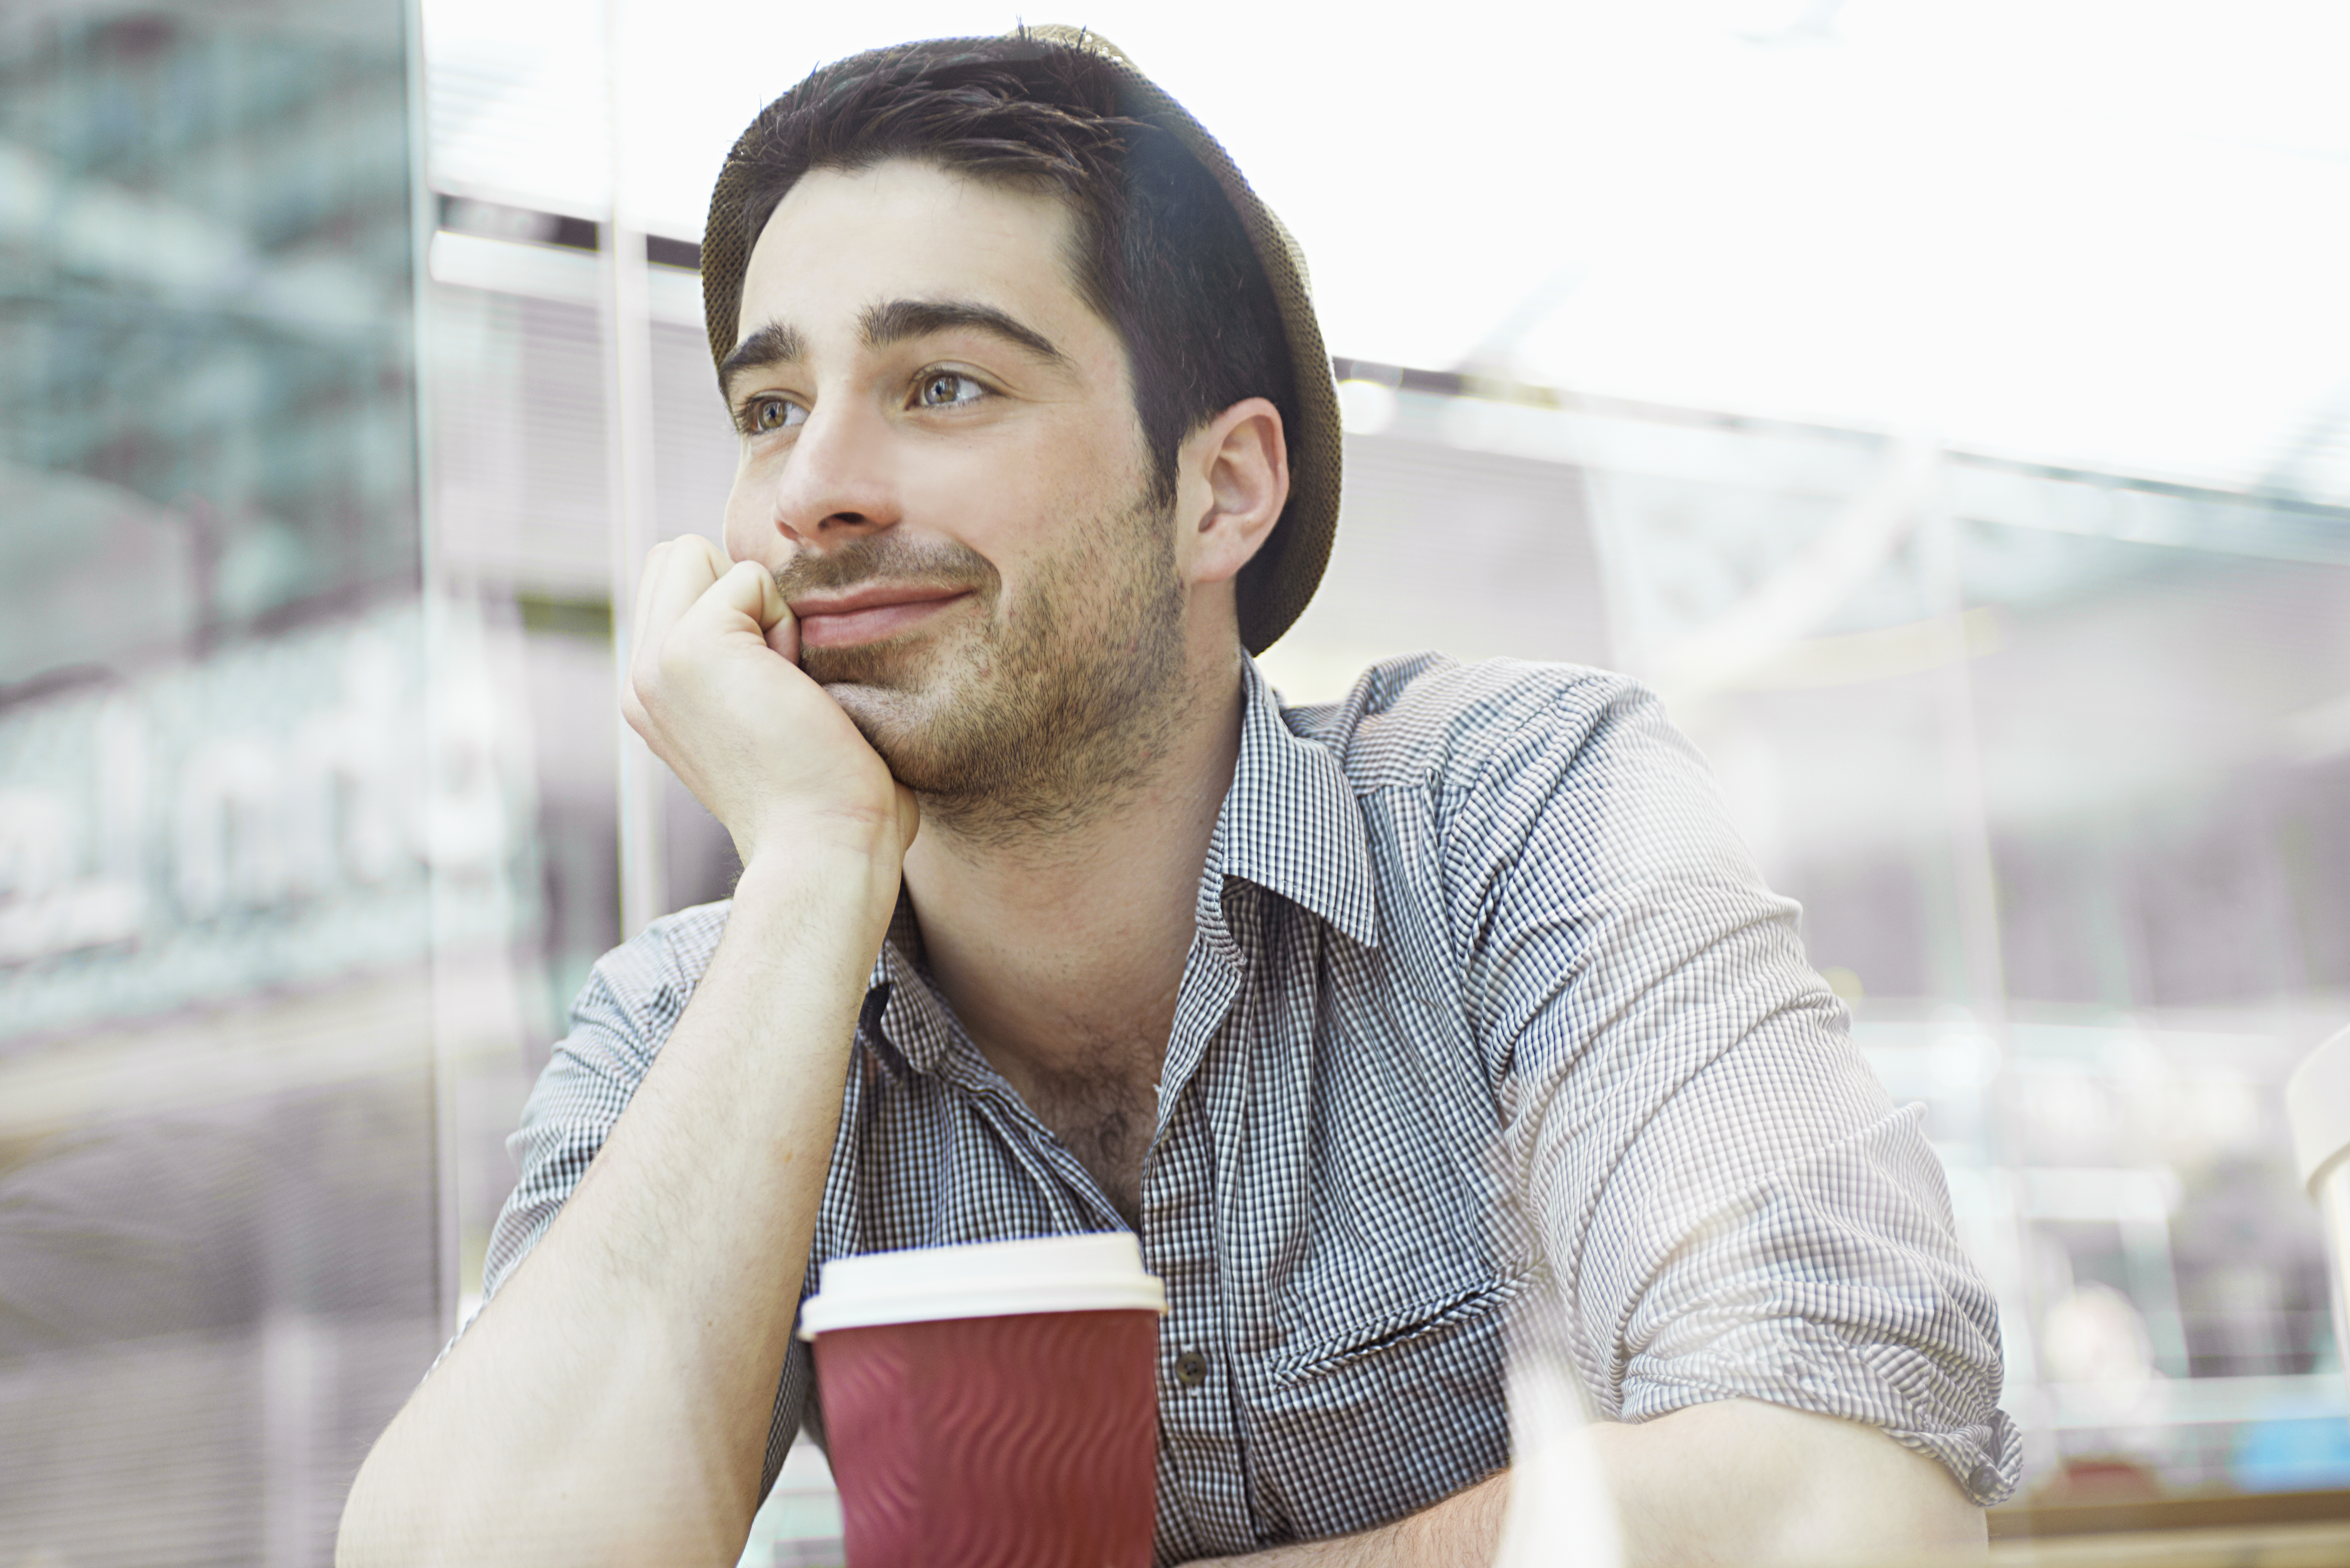 Man sitting in cafe with coffee | Source: Getty Images